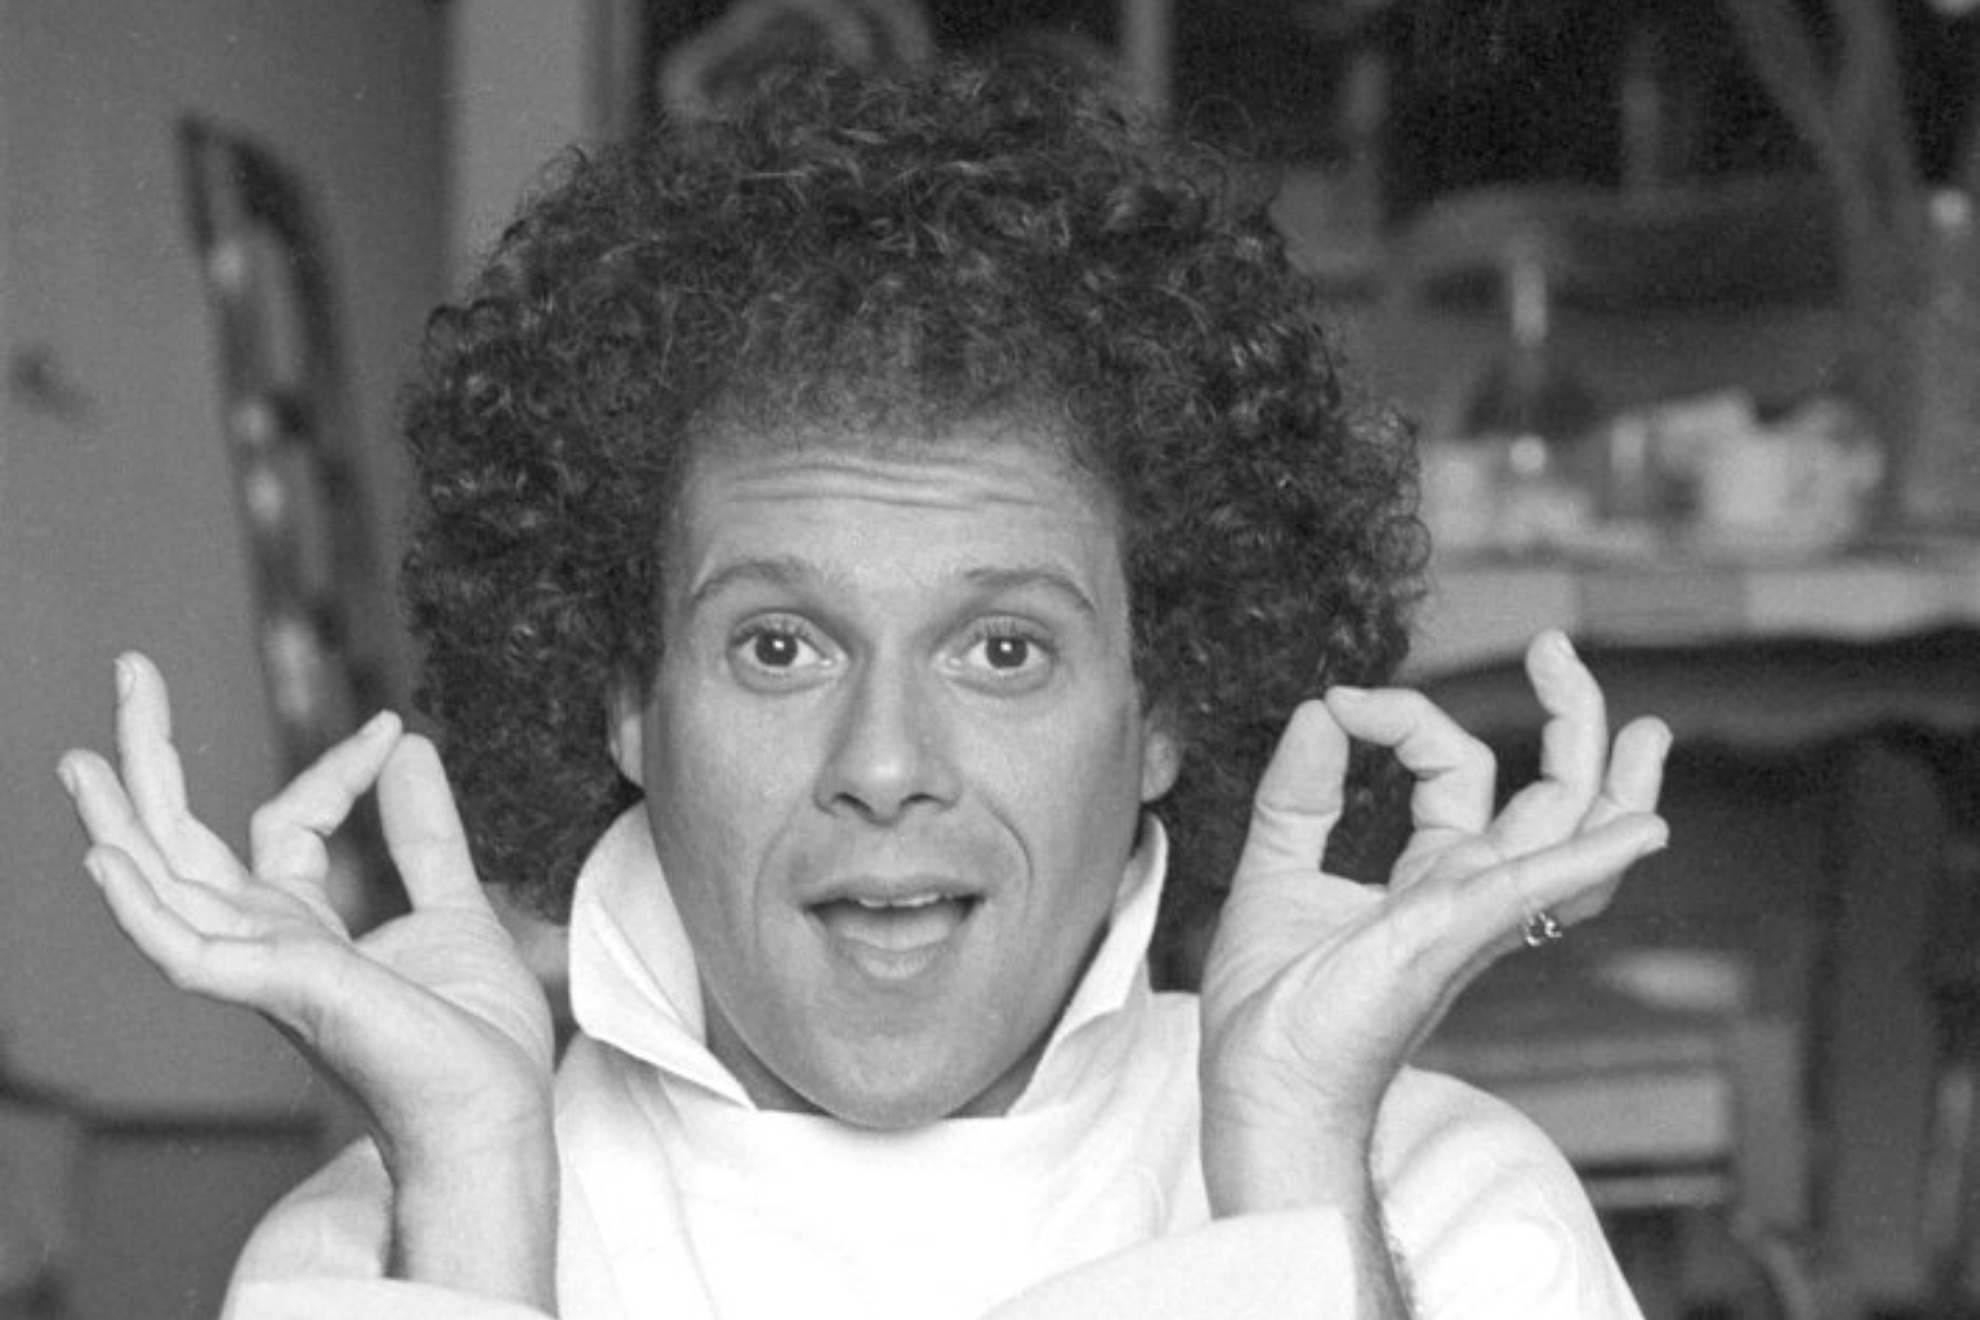 Richard Simmons responds to Pauly Shore's intention of portraying him in an Oscar-worthy biopic